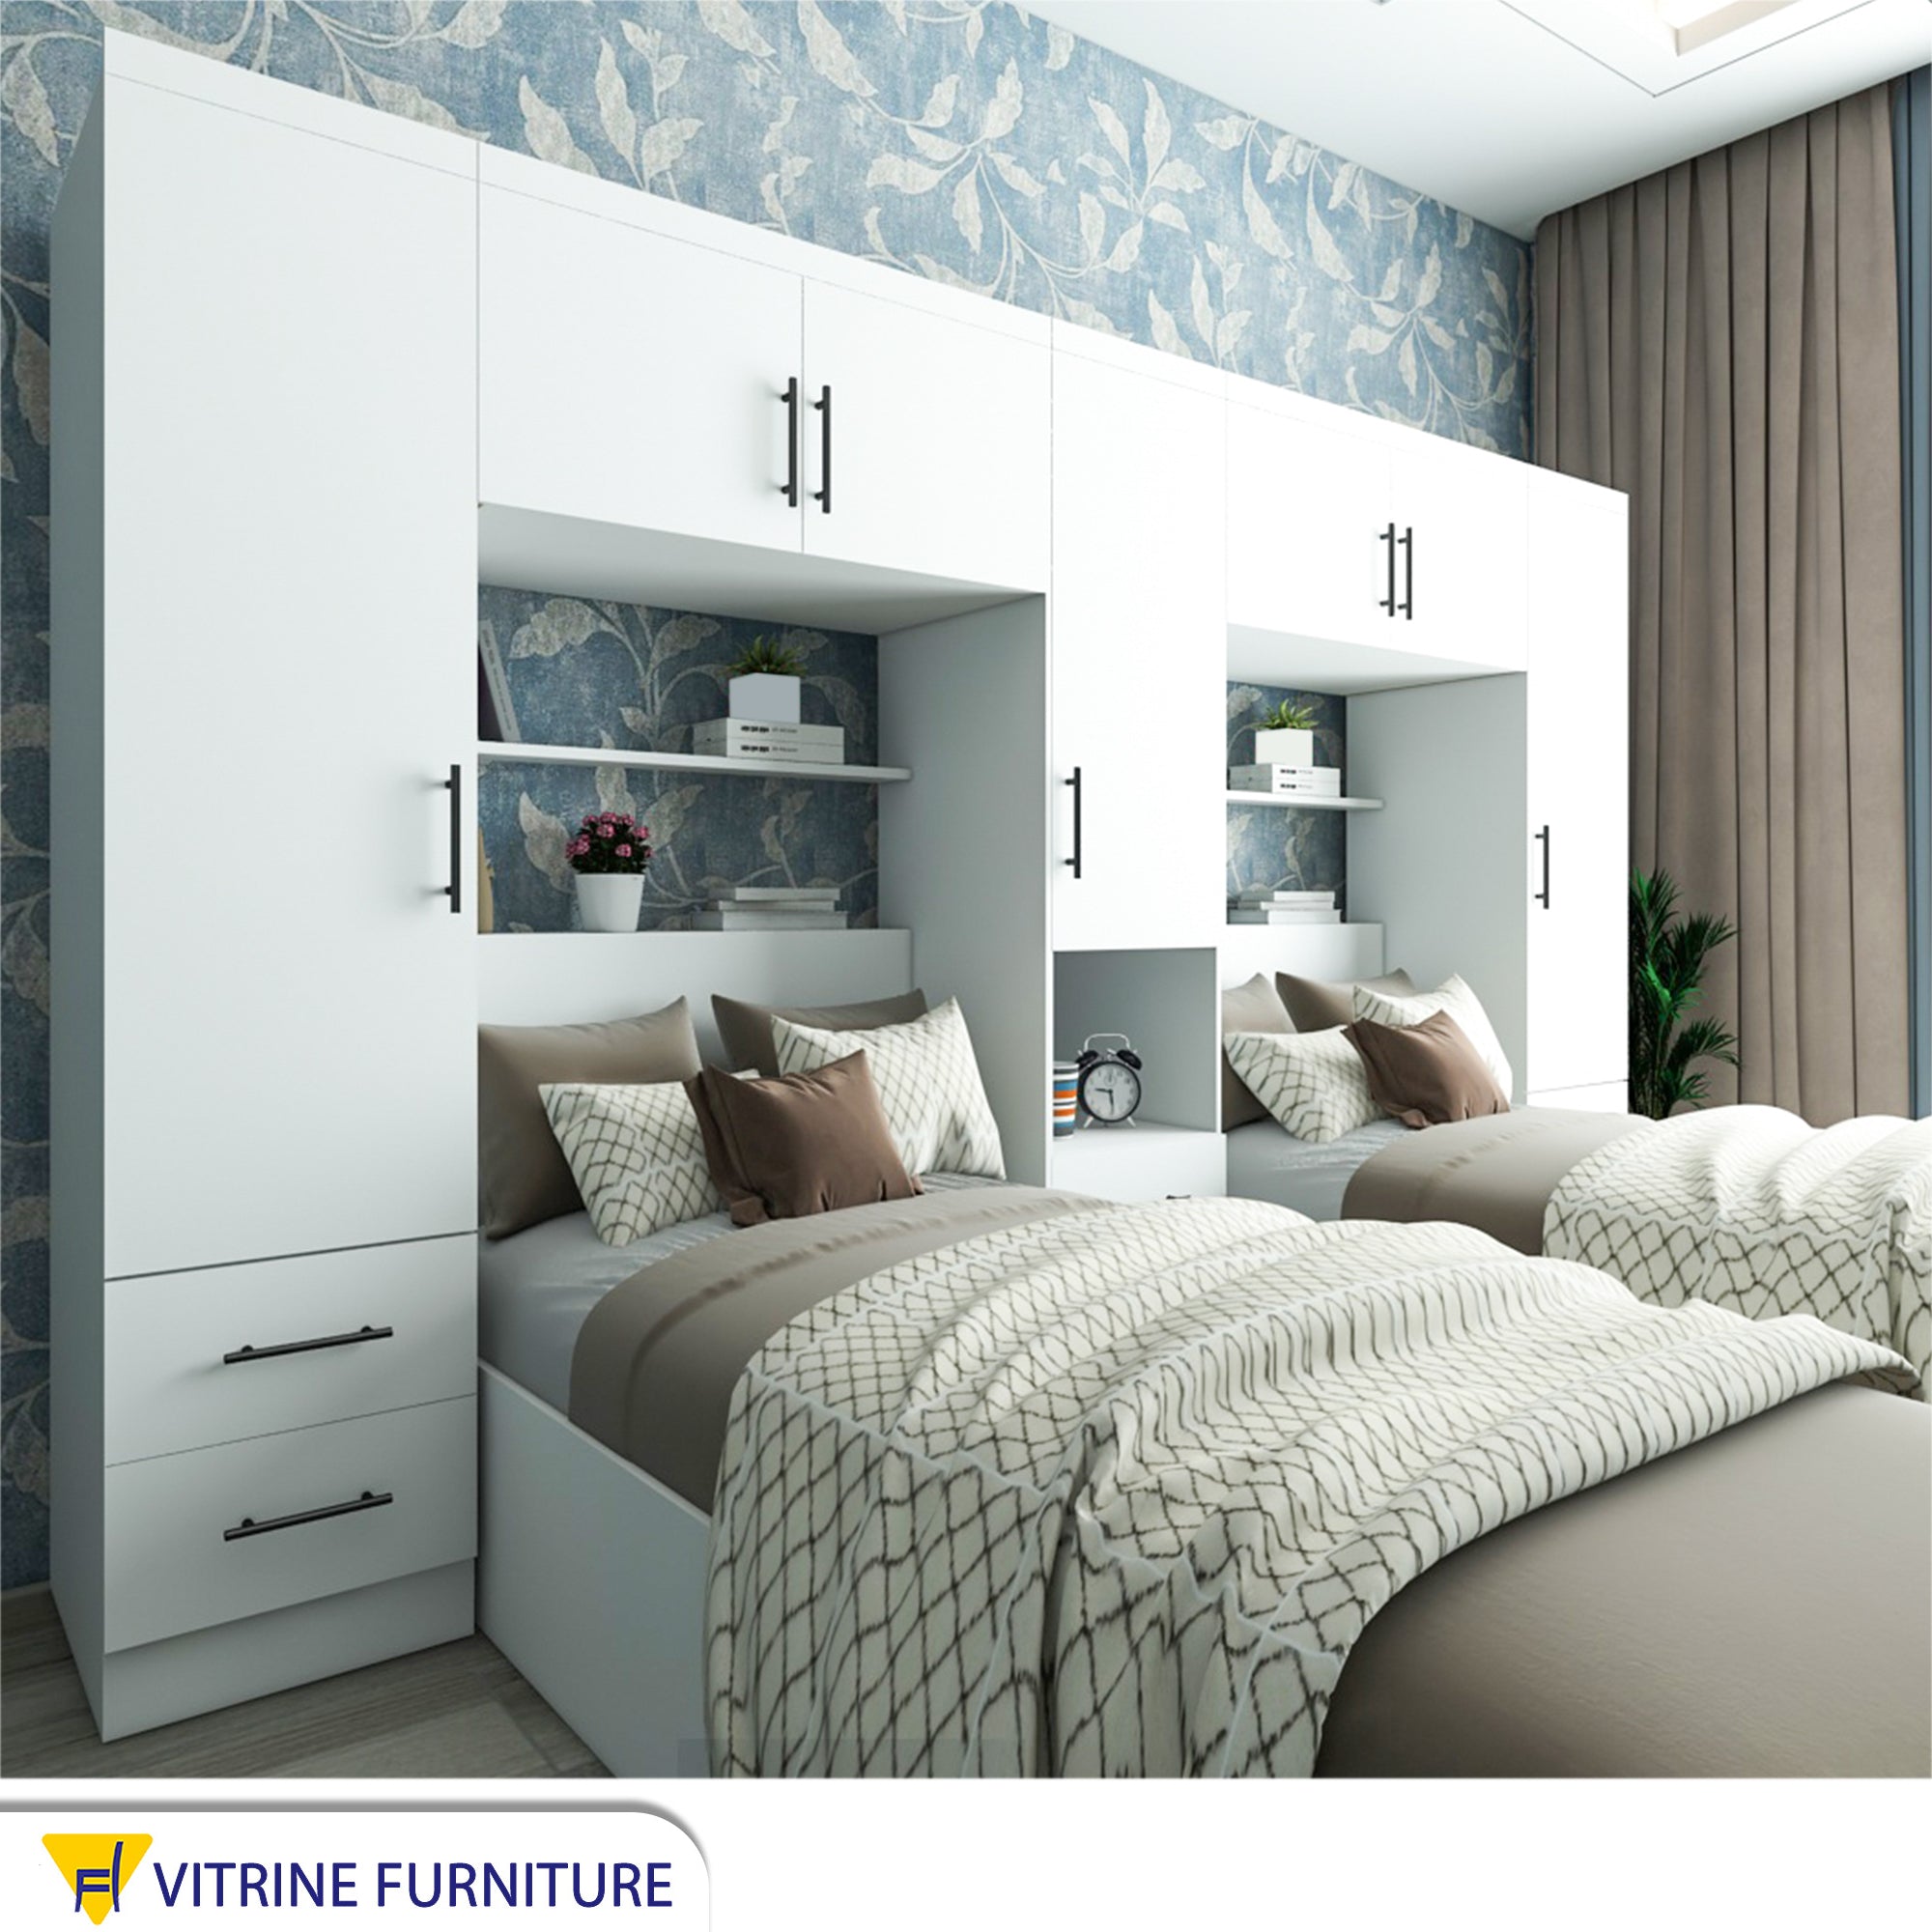 Bedroom with two white beds and a large wardrobe